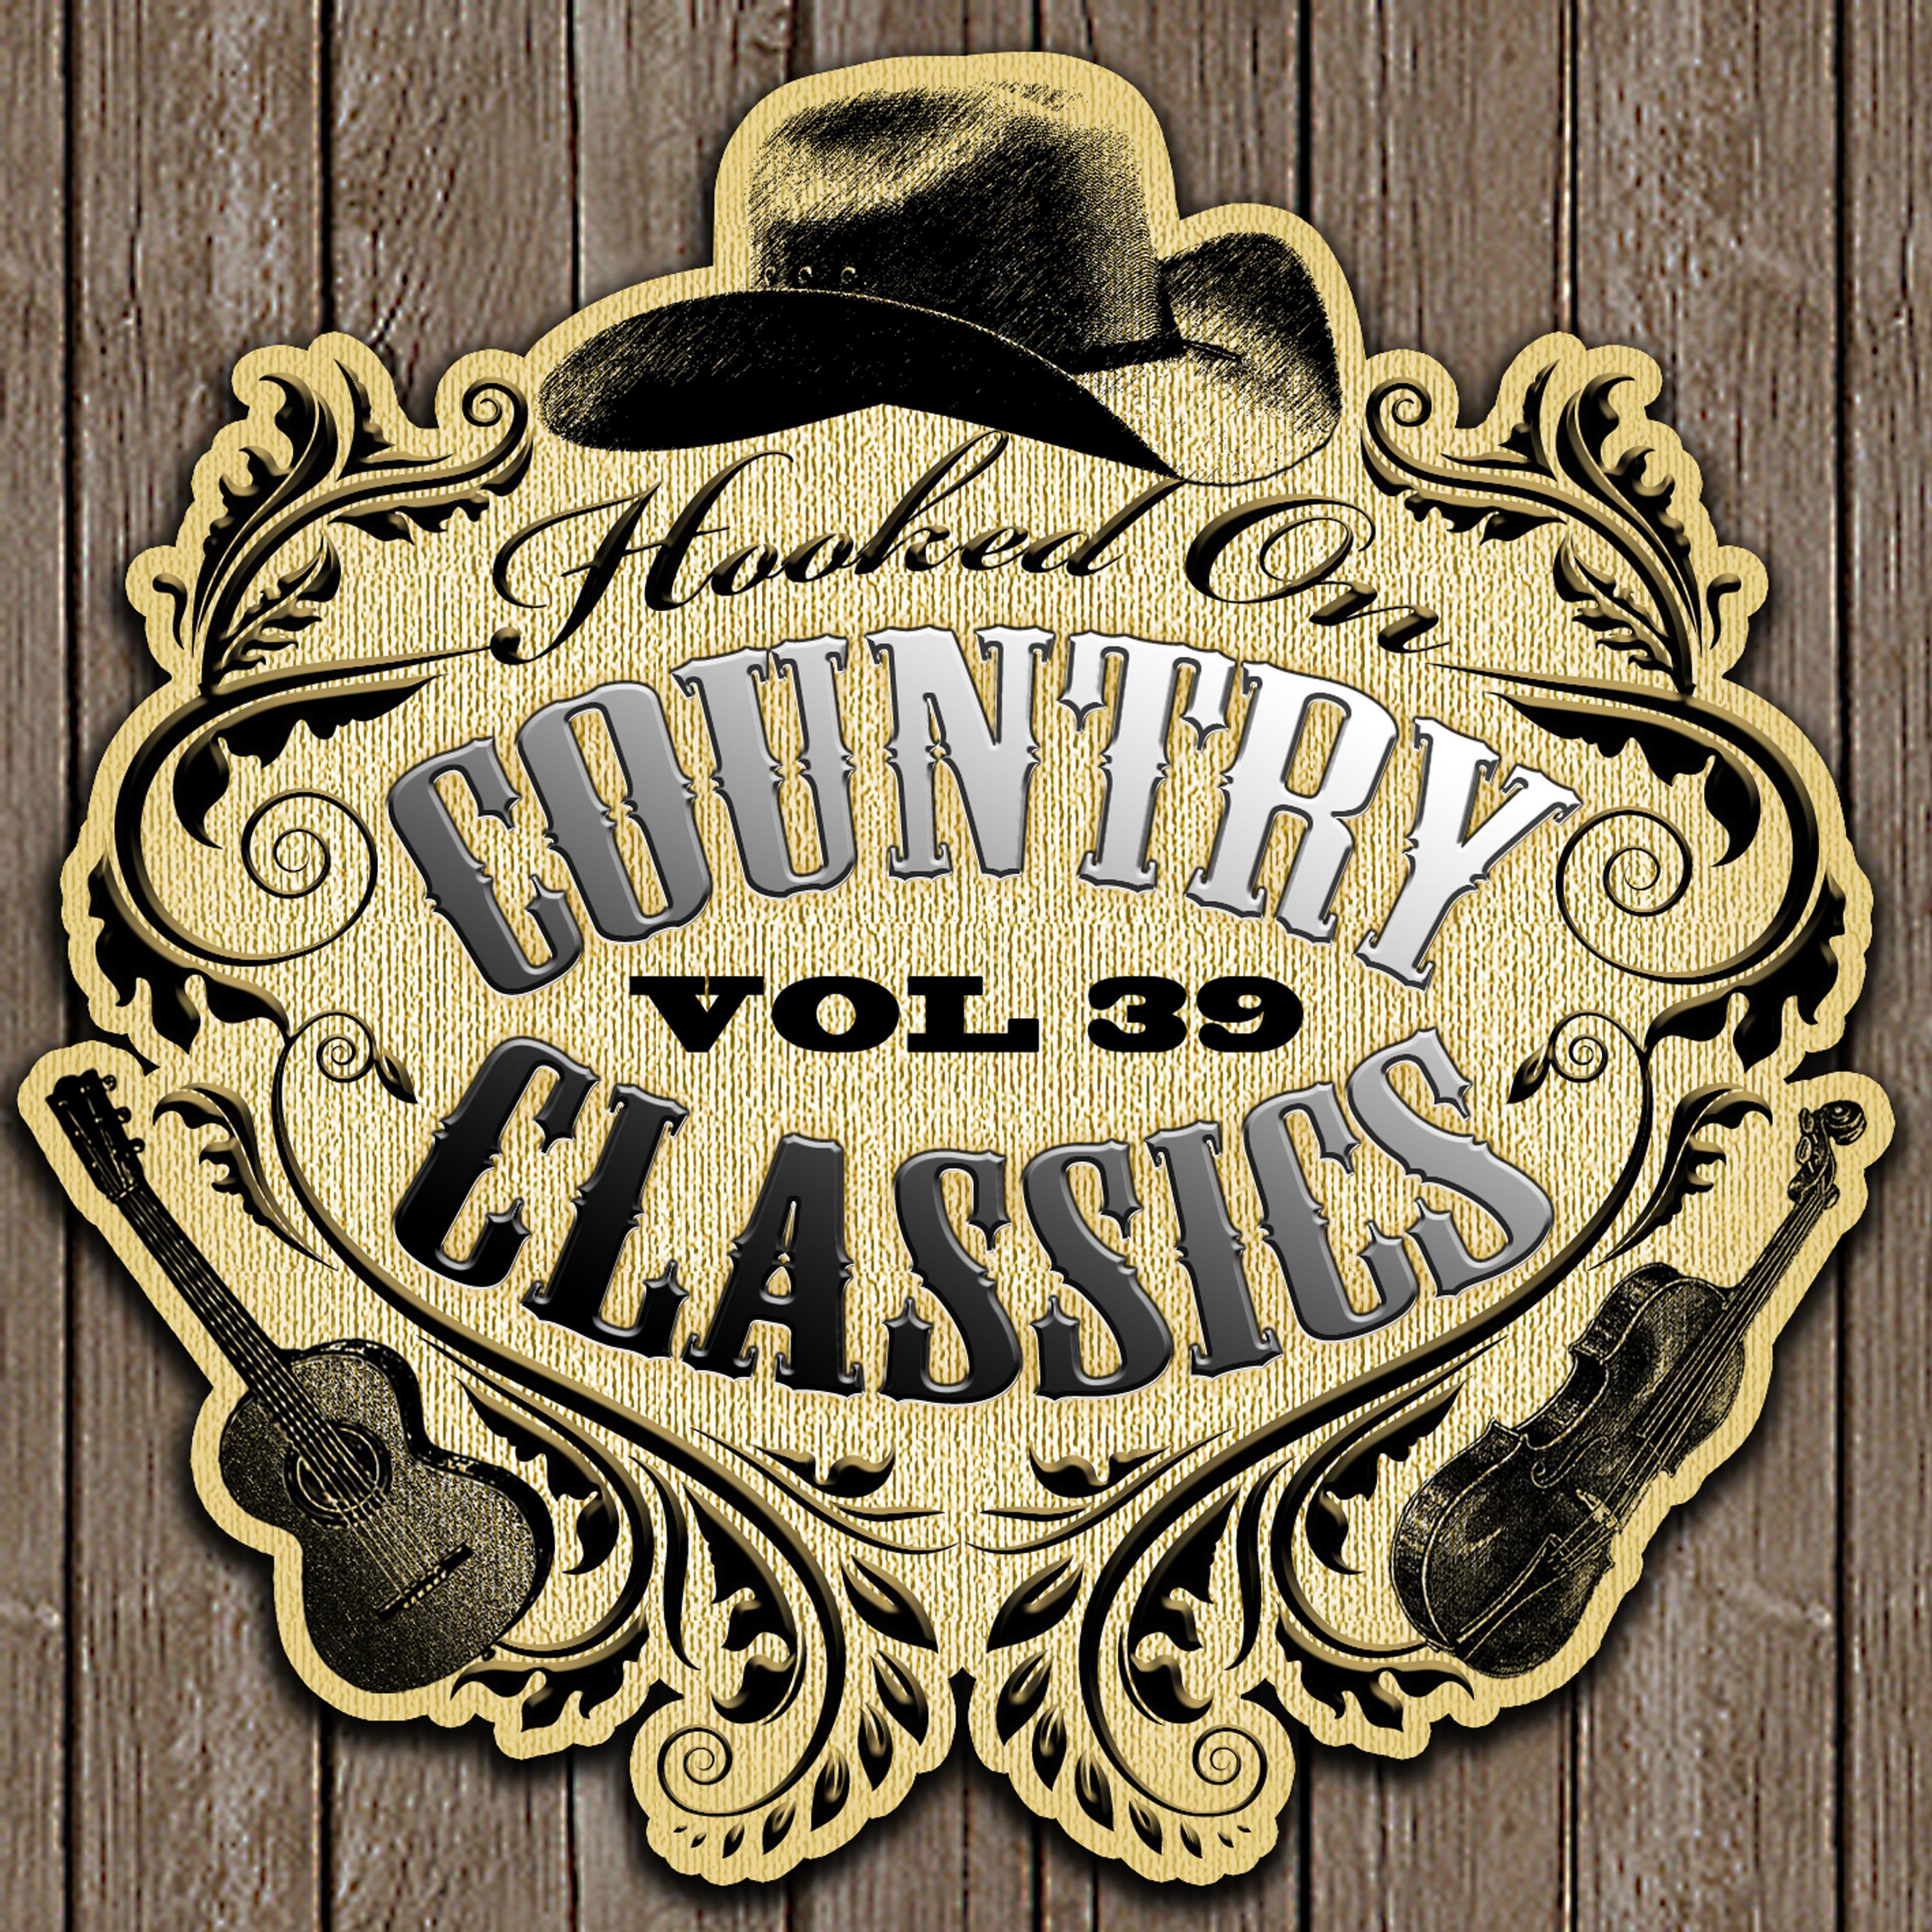 Hooked On Country Classics, Vol. 39